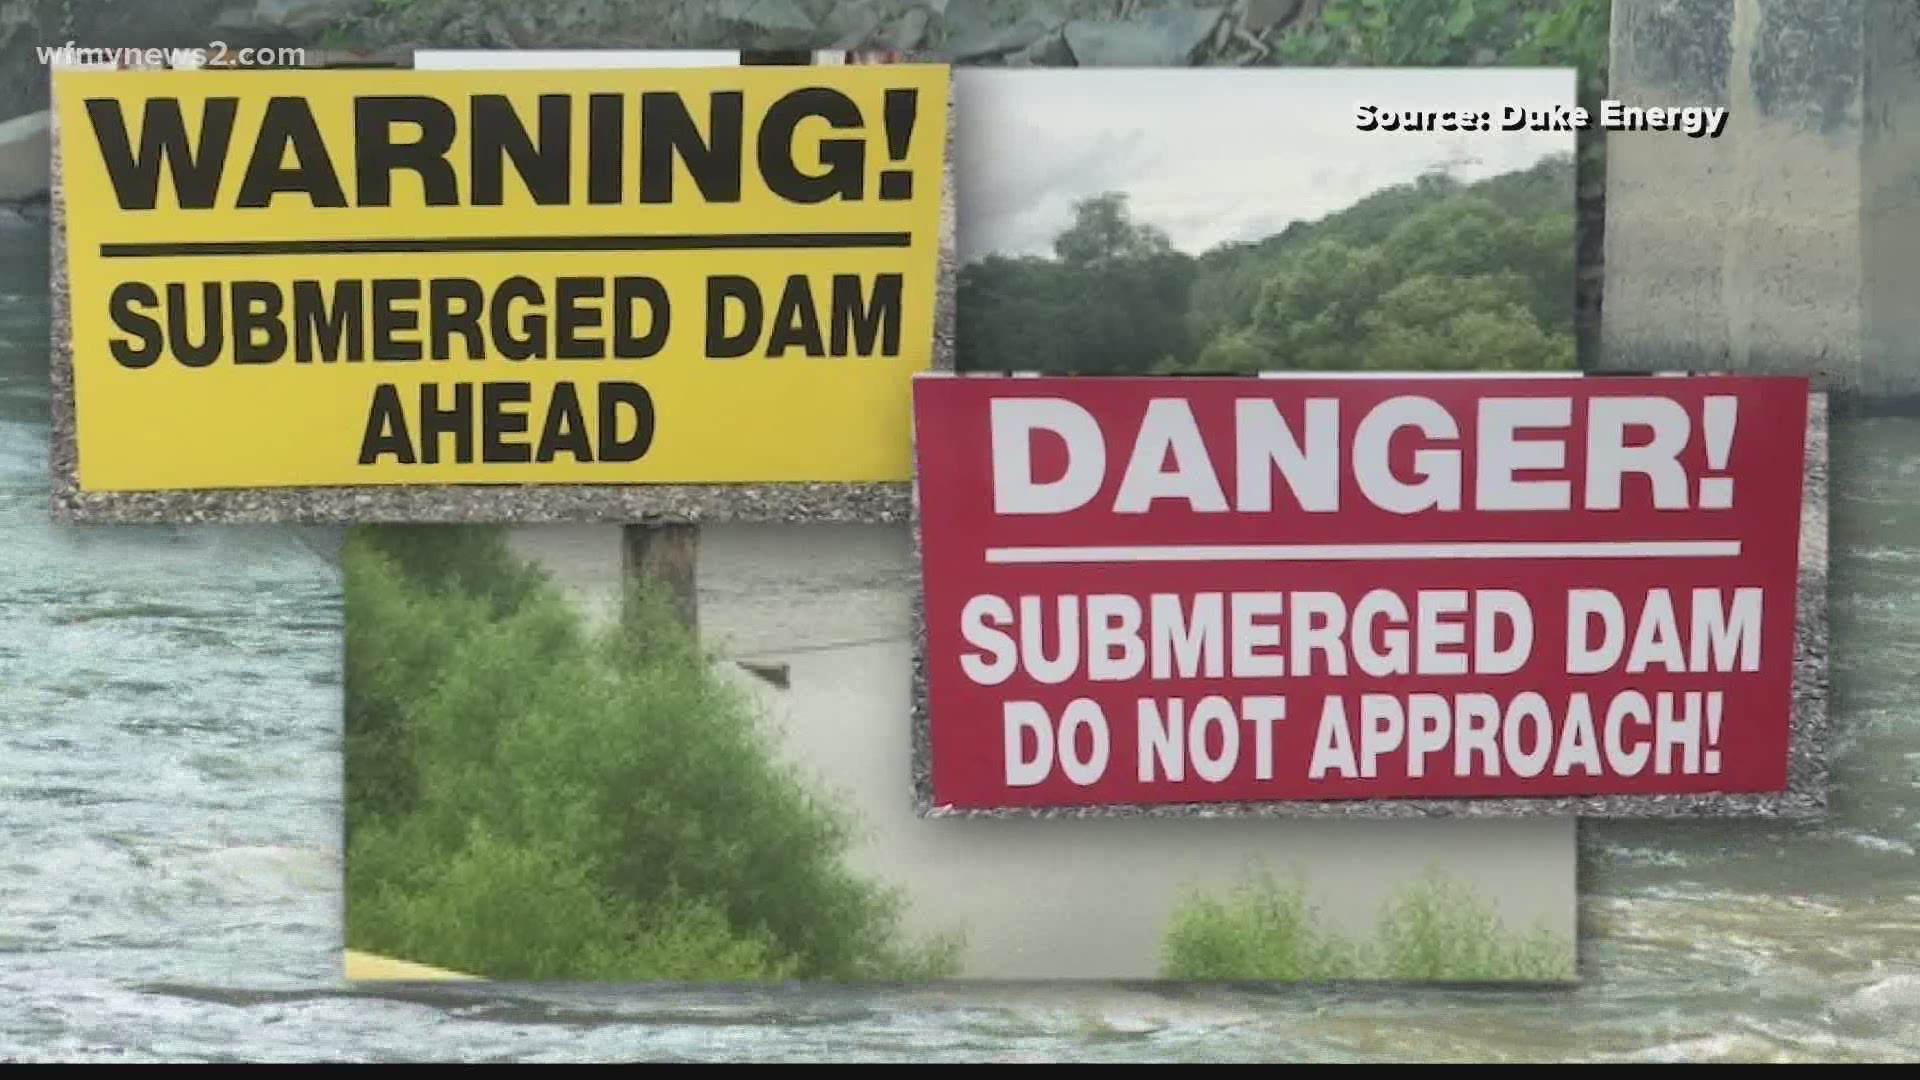 The company put up more large signs to make sure people do not get near the dam while tubing on the Dan River.